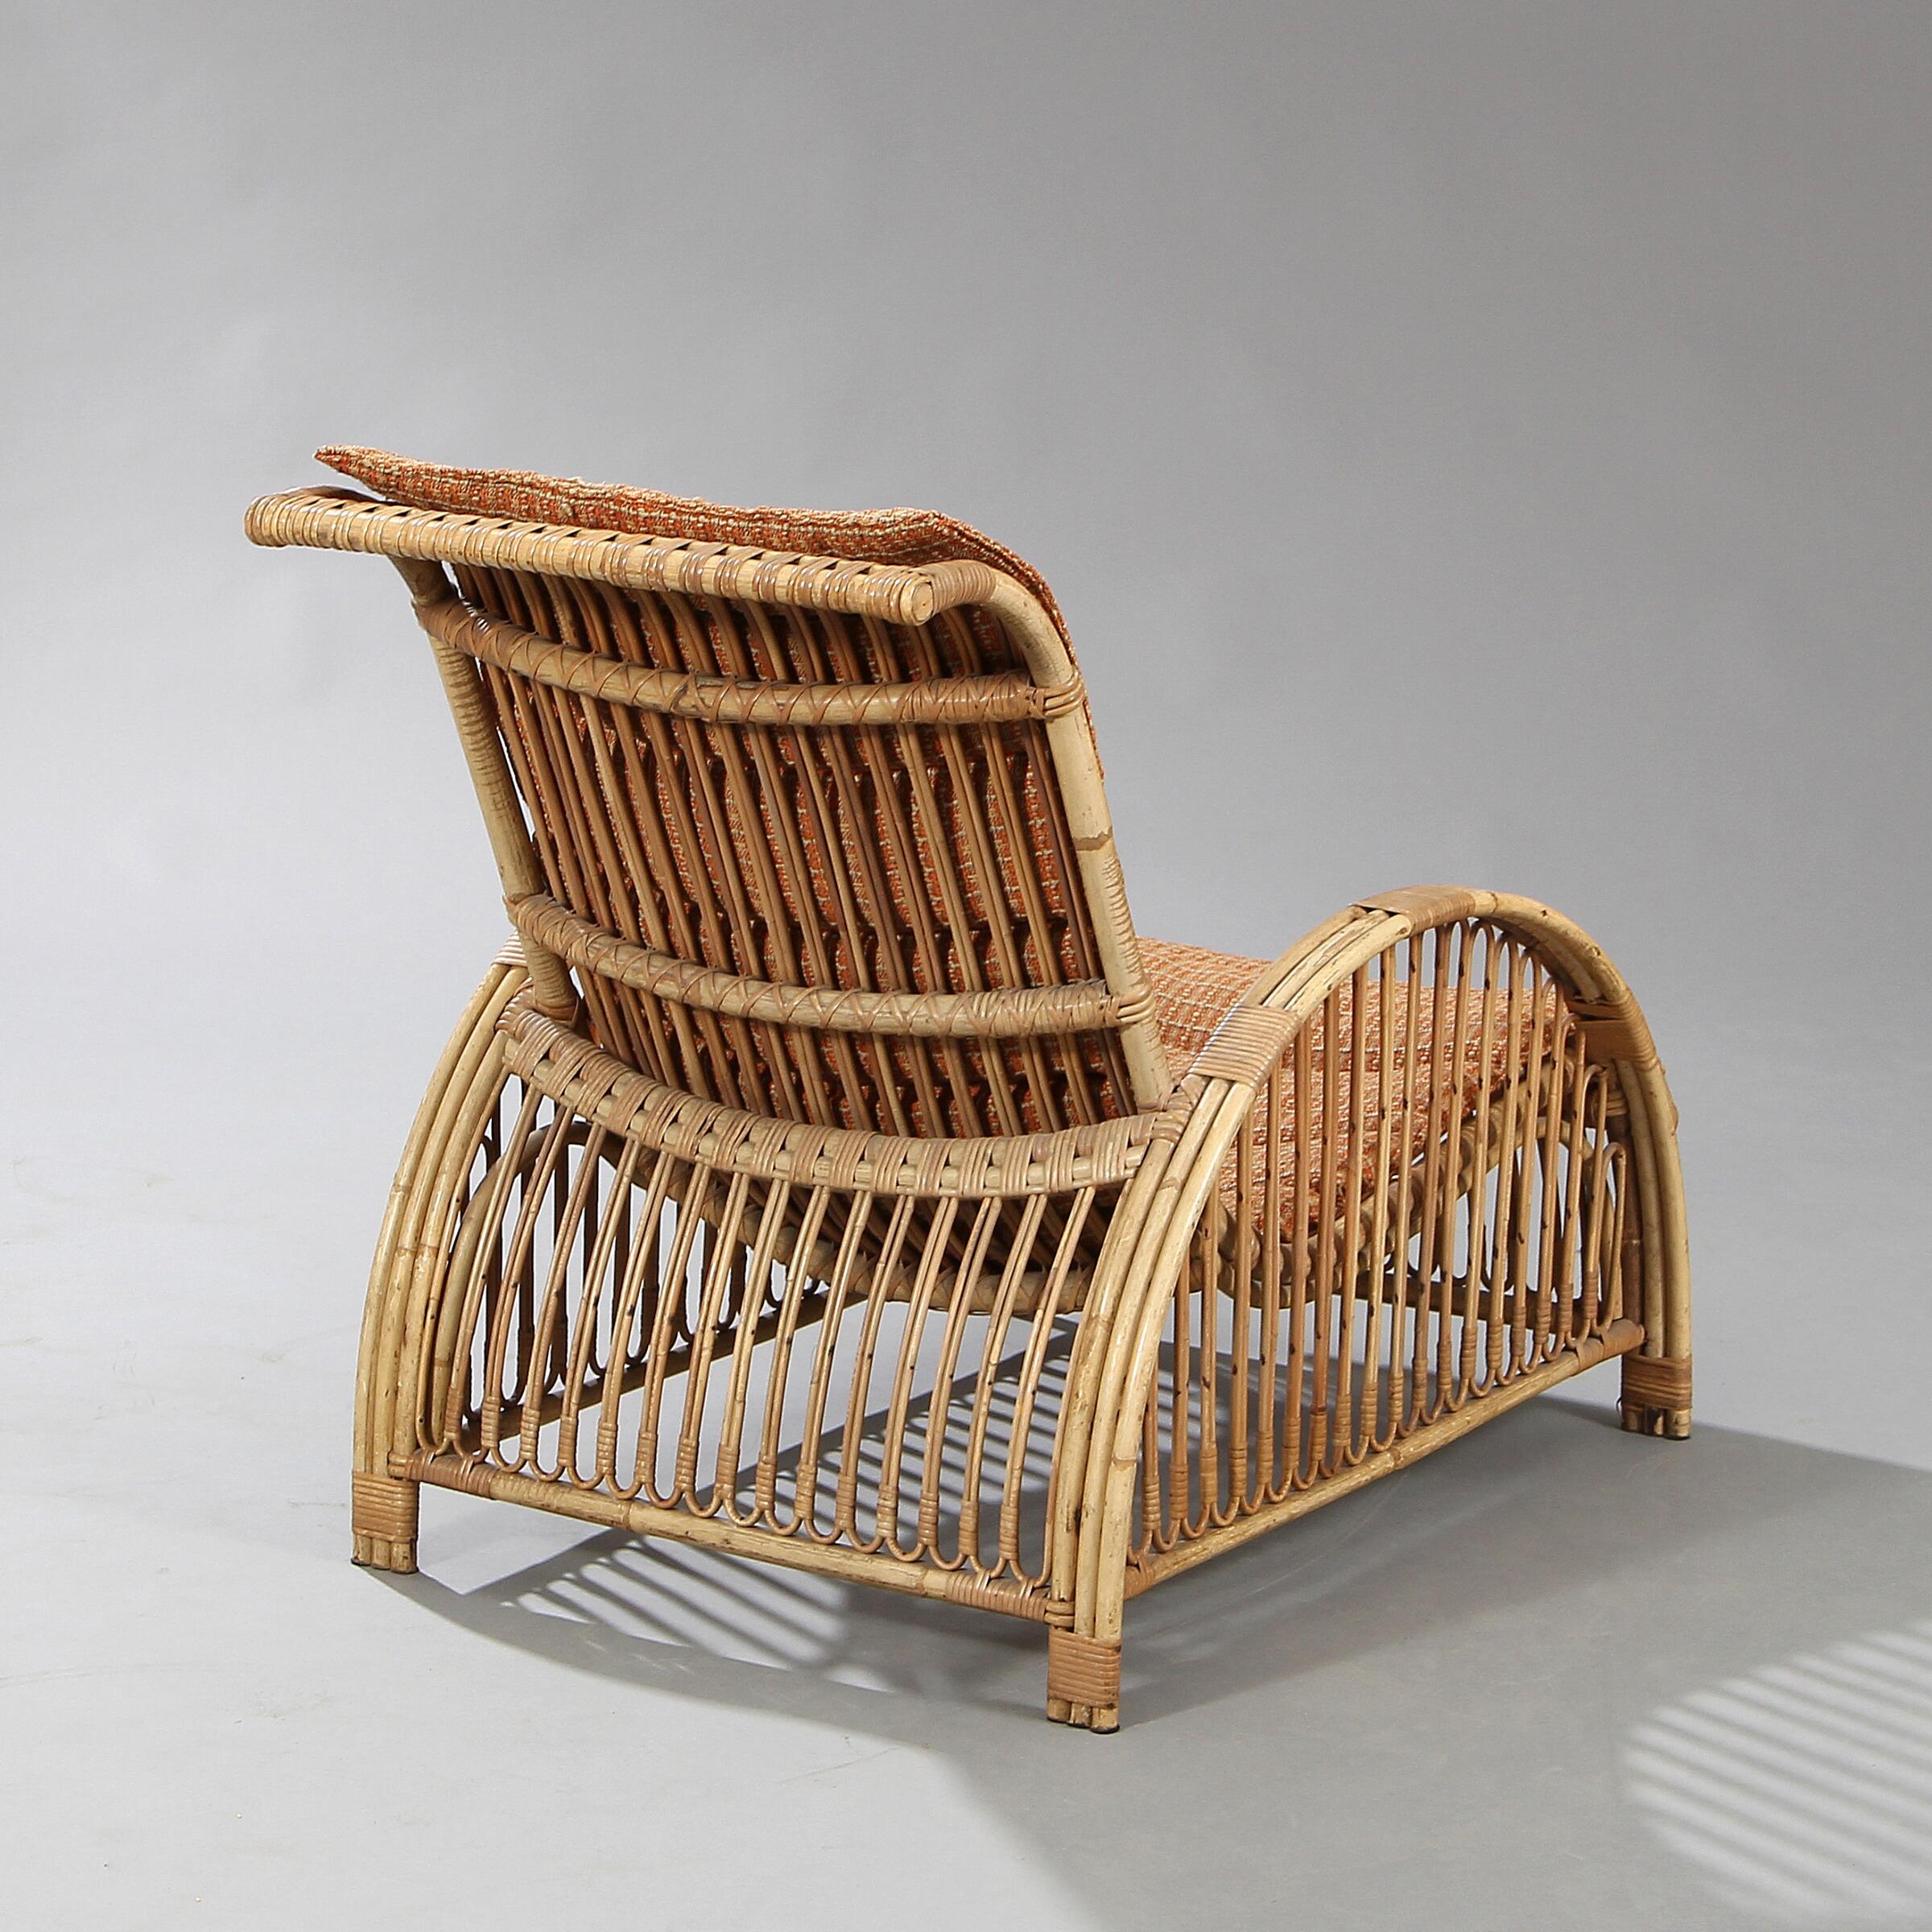 Arne Jacobsen “Paris Chair”, Easy Chair with Frame of Bamboo with Woven Cane (Skandinavische Moderne) im Angebot